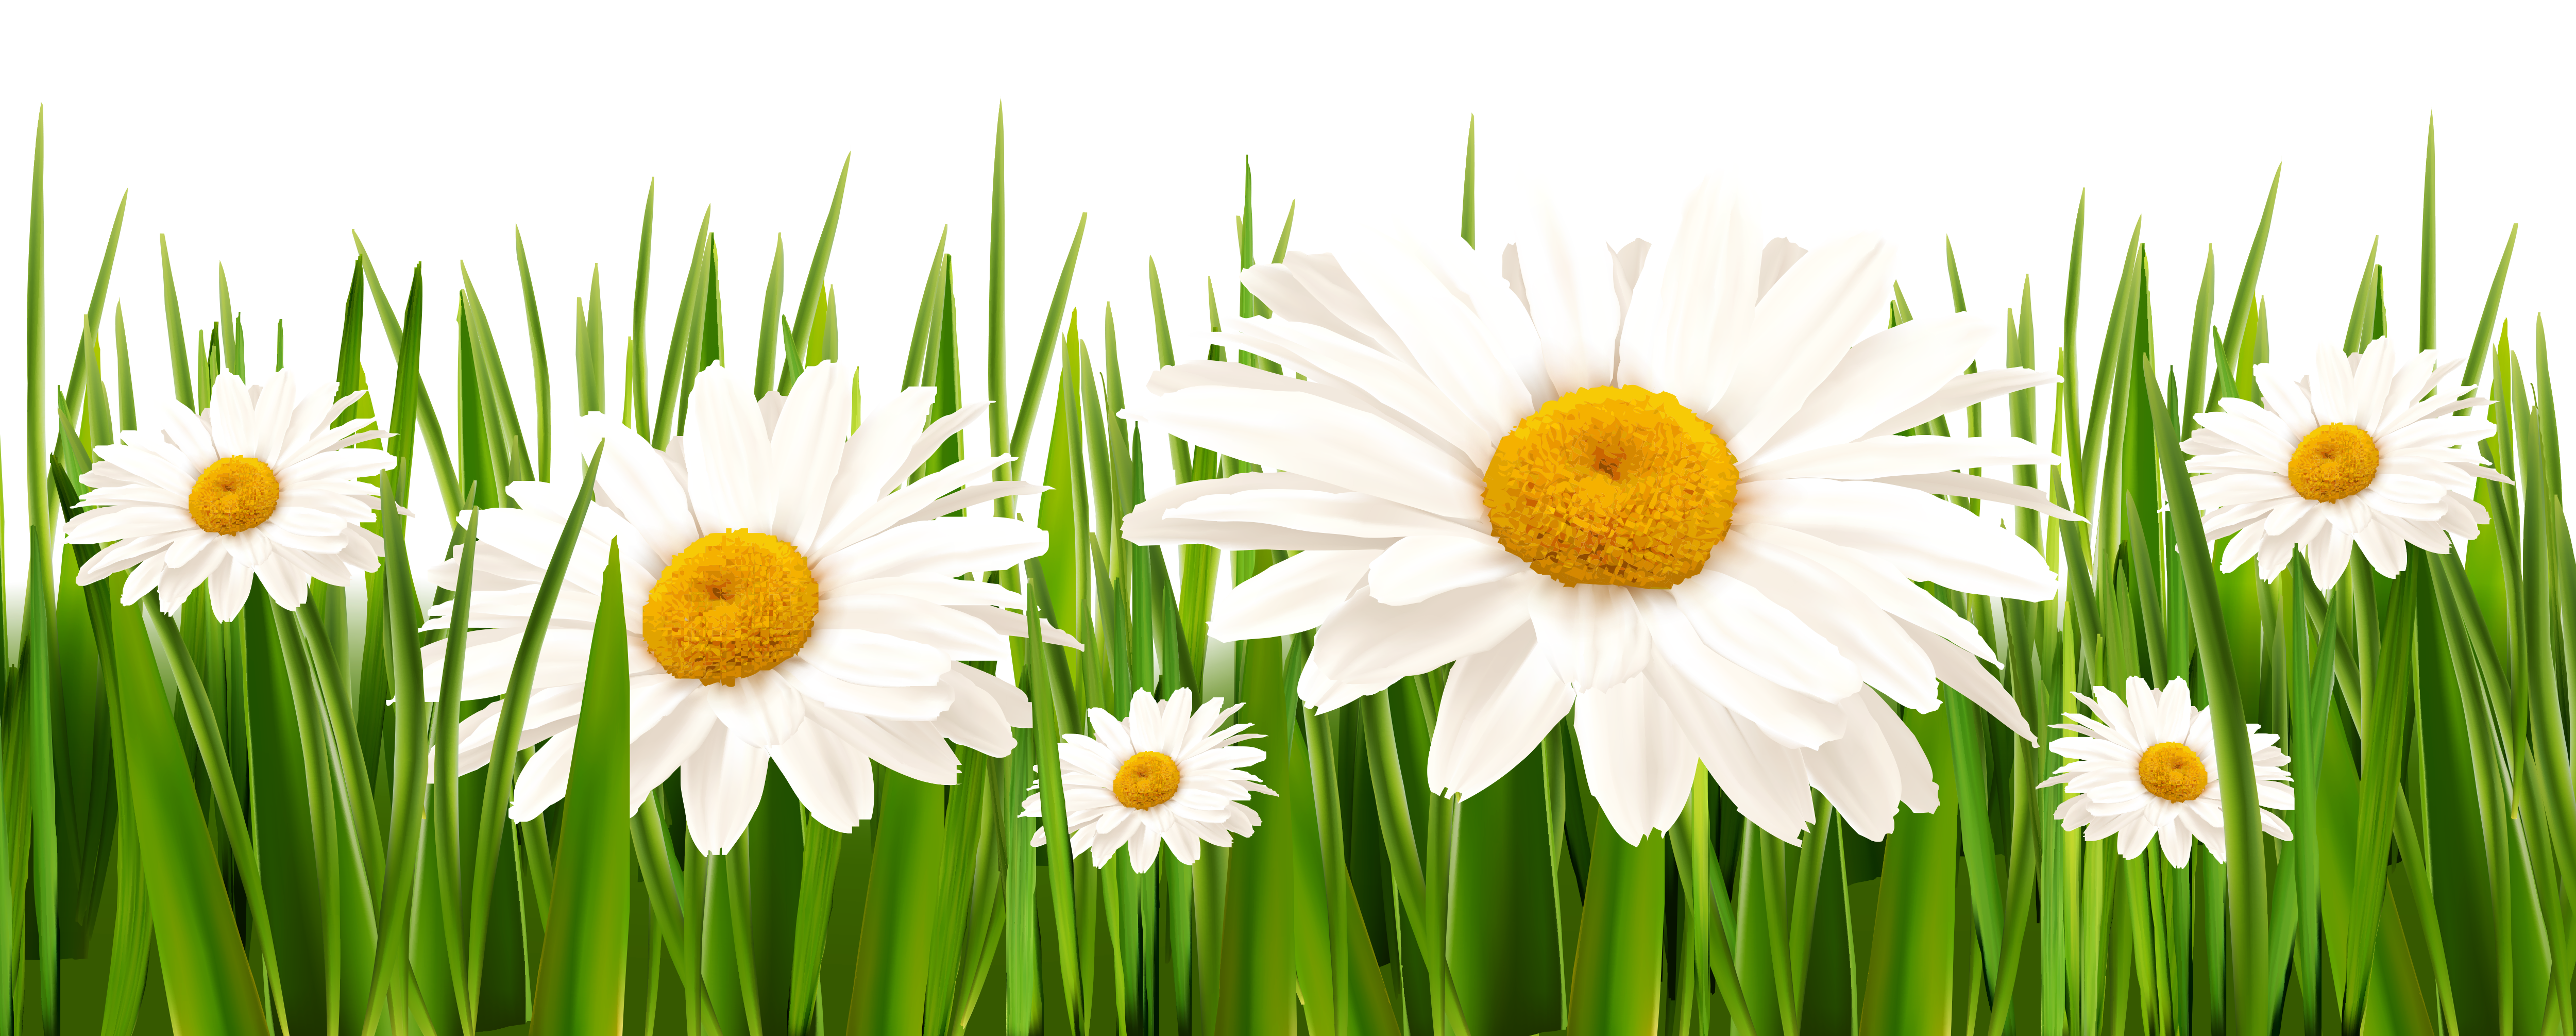 Grass and White Flowers PNG Clipart